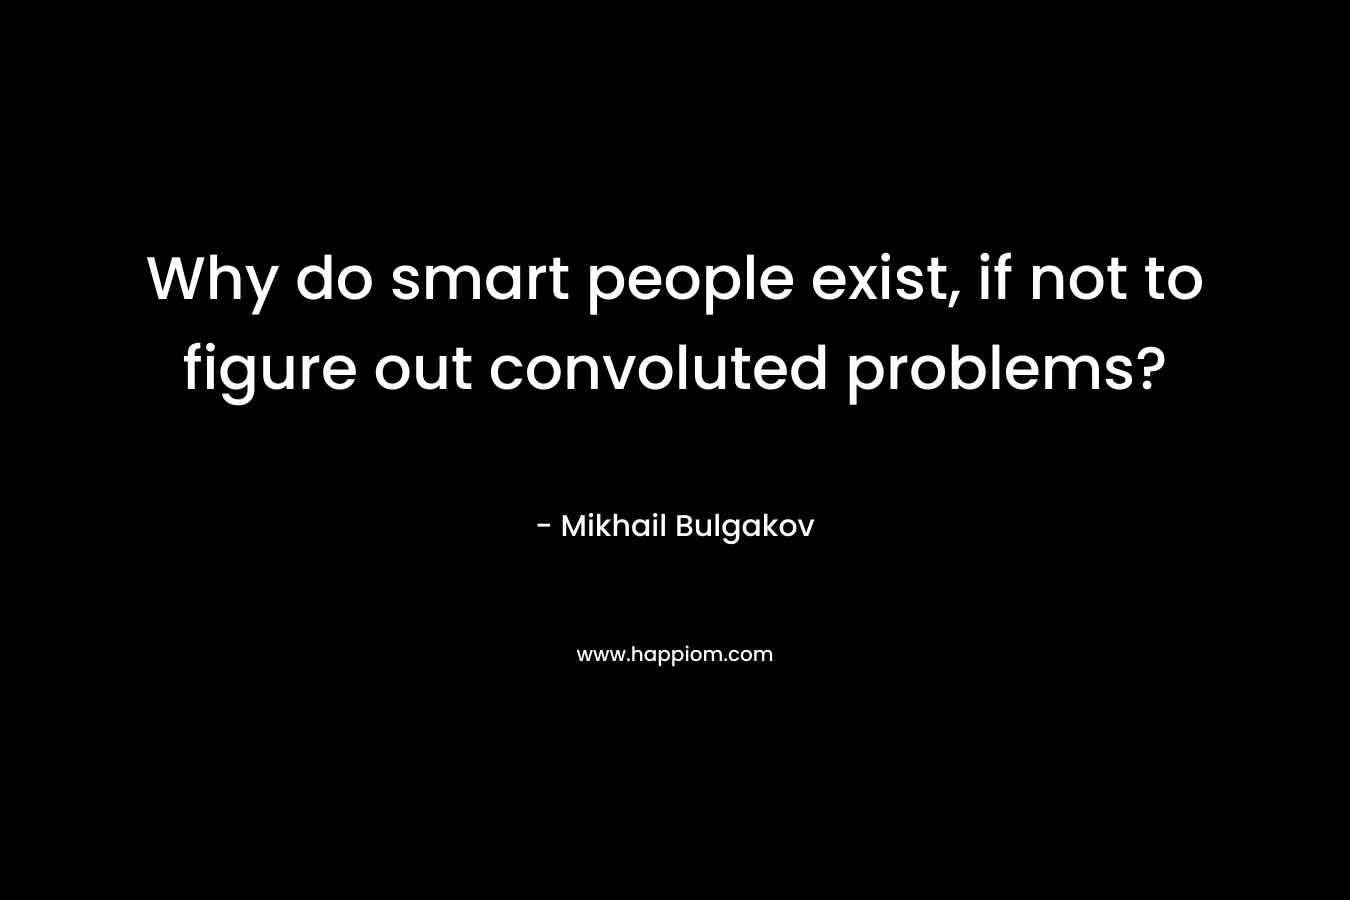 Why do smart people exist, if not to figure out convoluted problems? – Mikhail Bulgakov